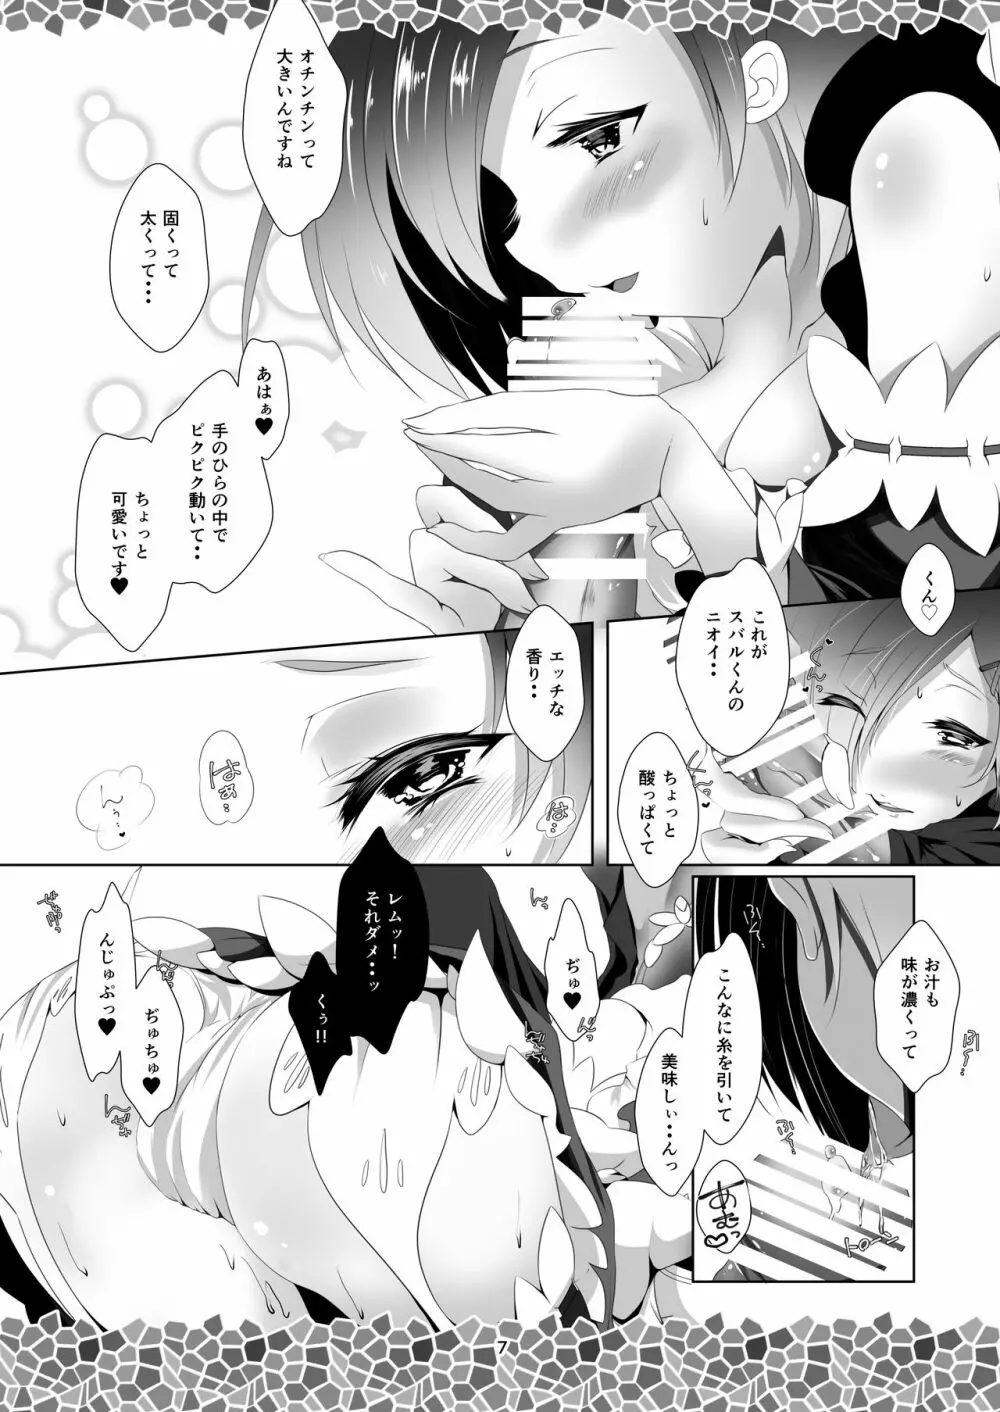 Re:レムから始めるお礼のお礼 - page9